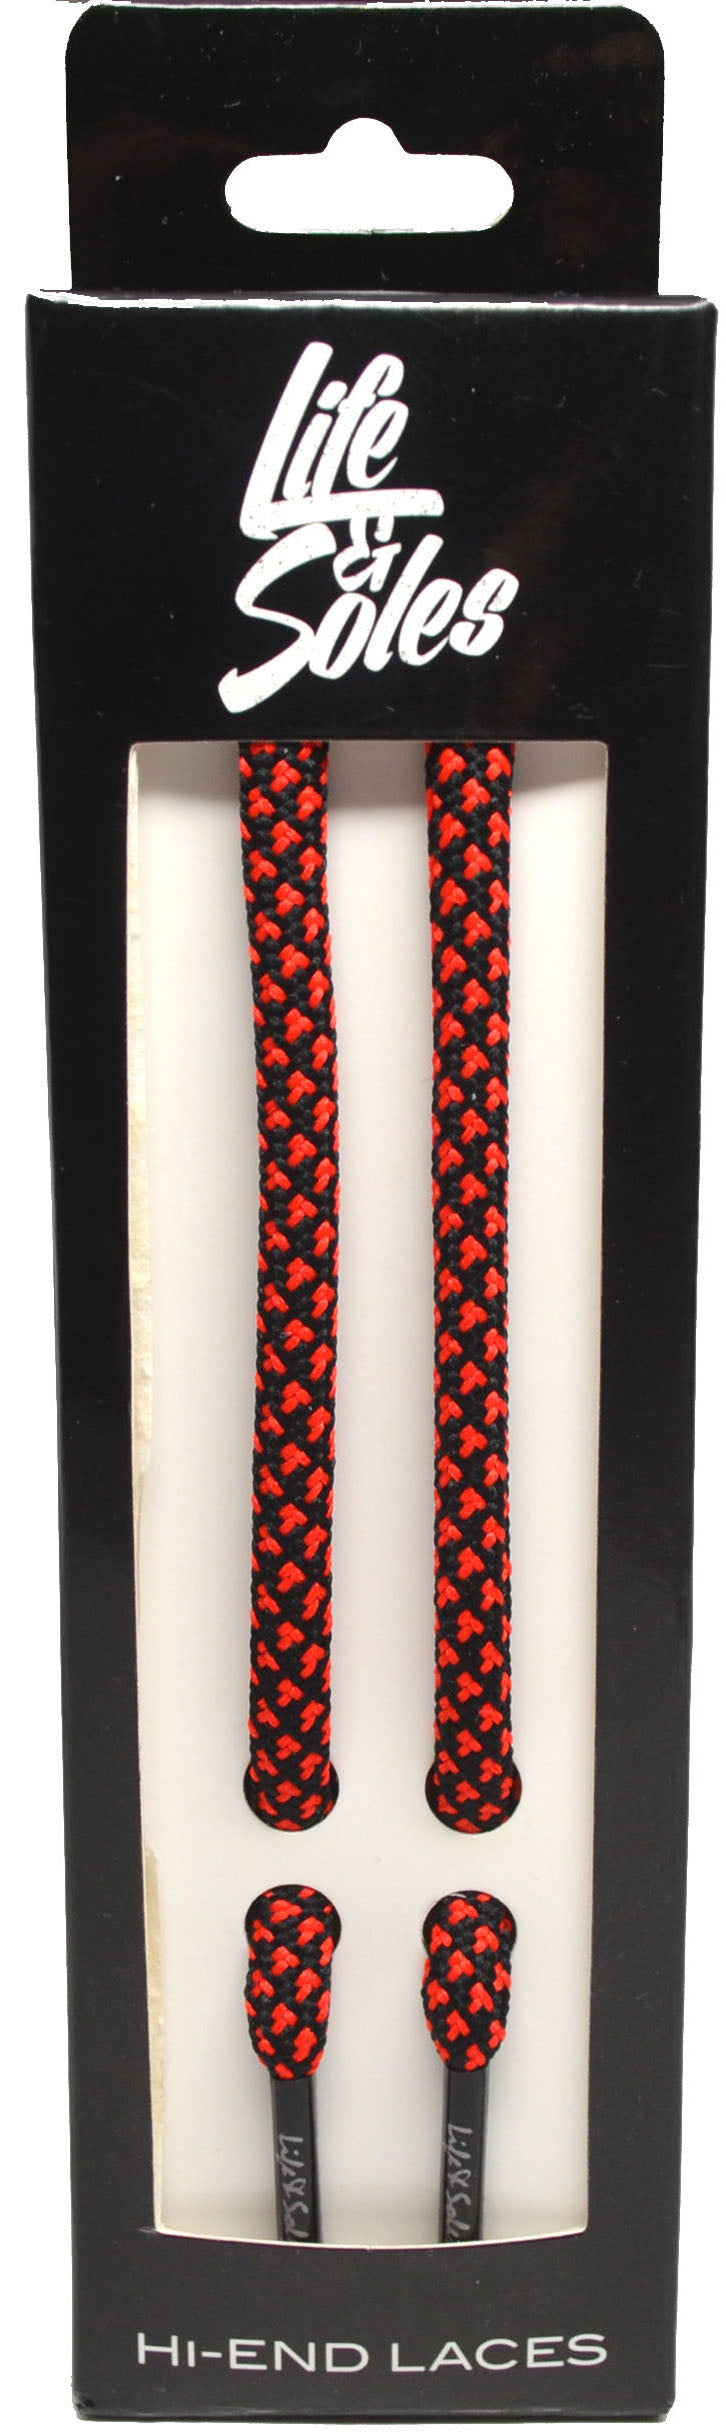 Black & Red Rope Shoelaces